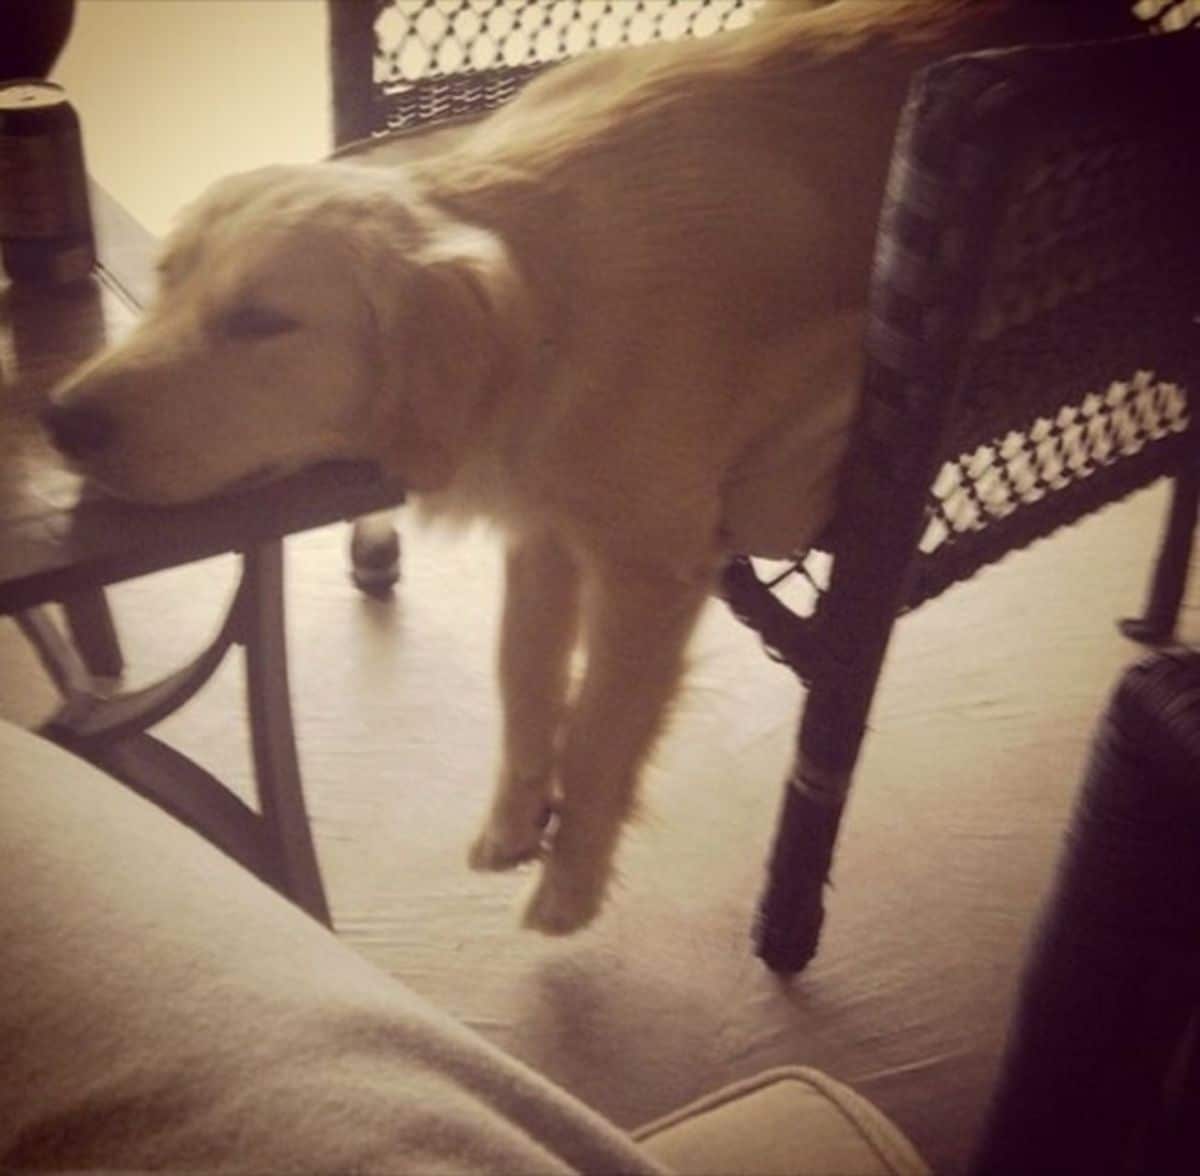 golden retriever sitting on a wicker chair with the front legs on the floor and the chin on a table in front of it